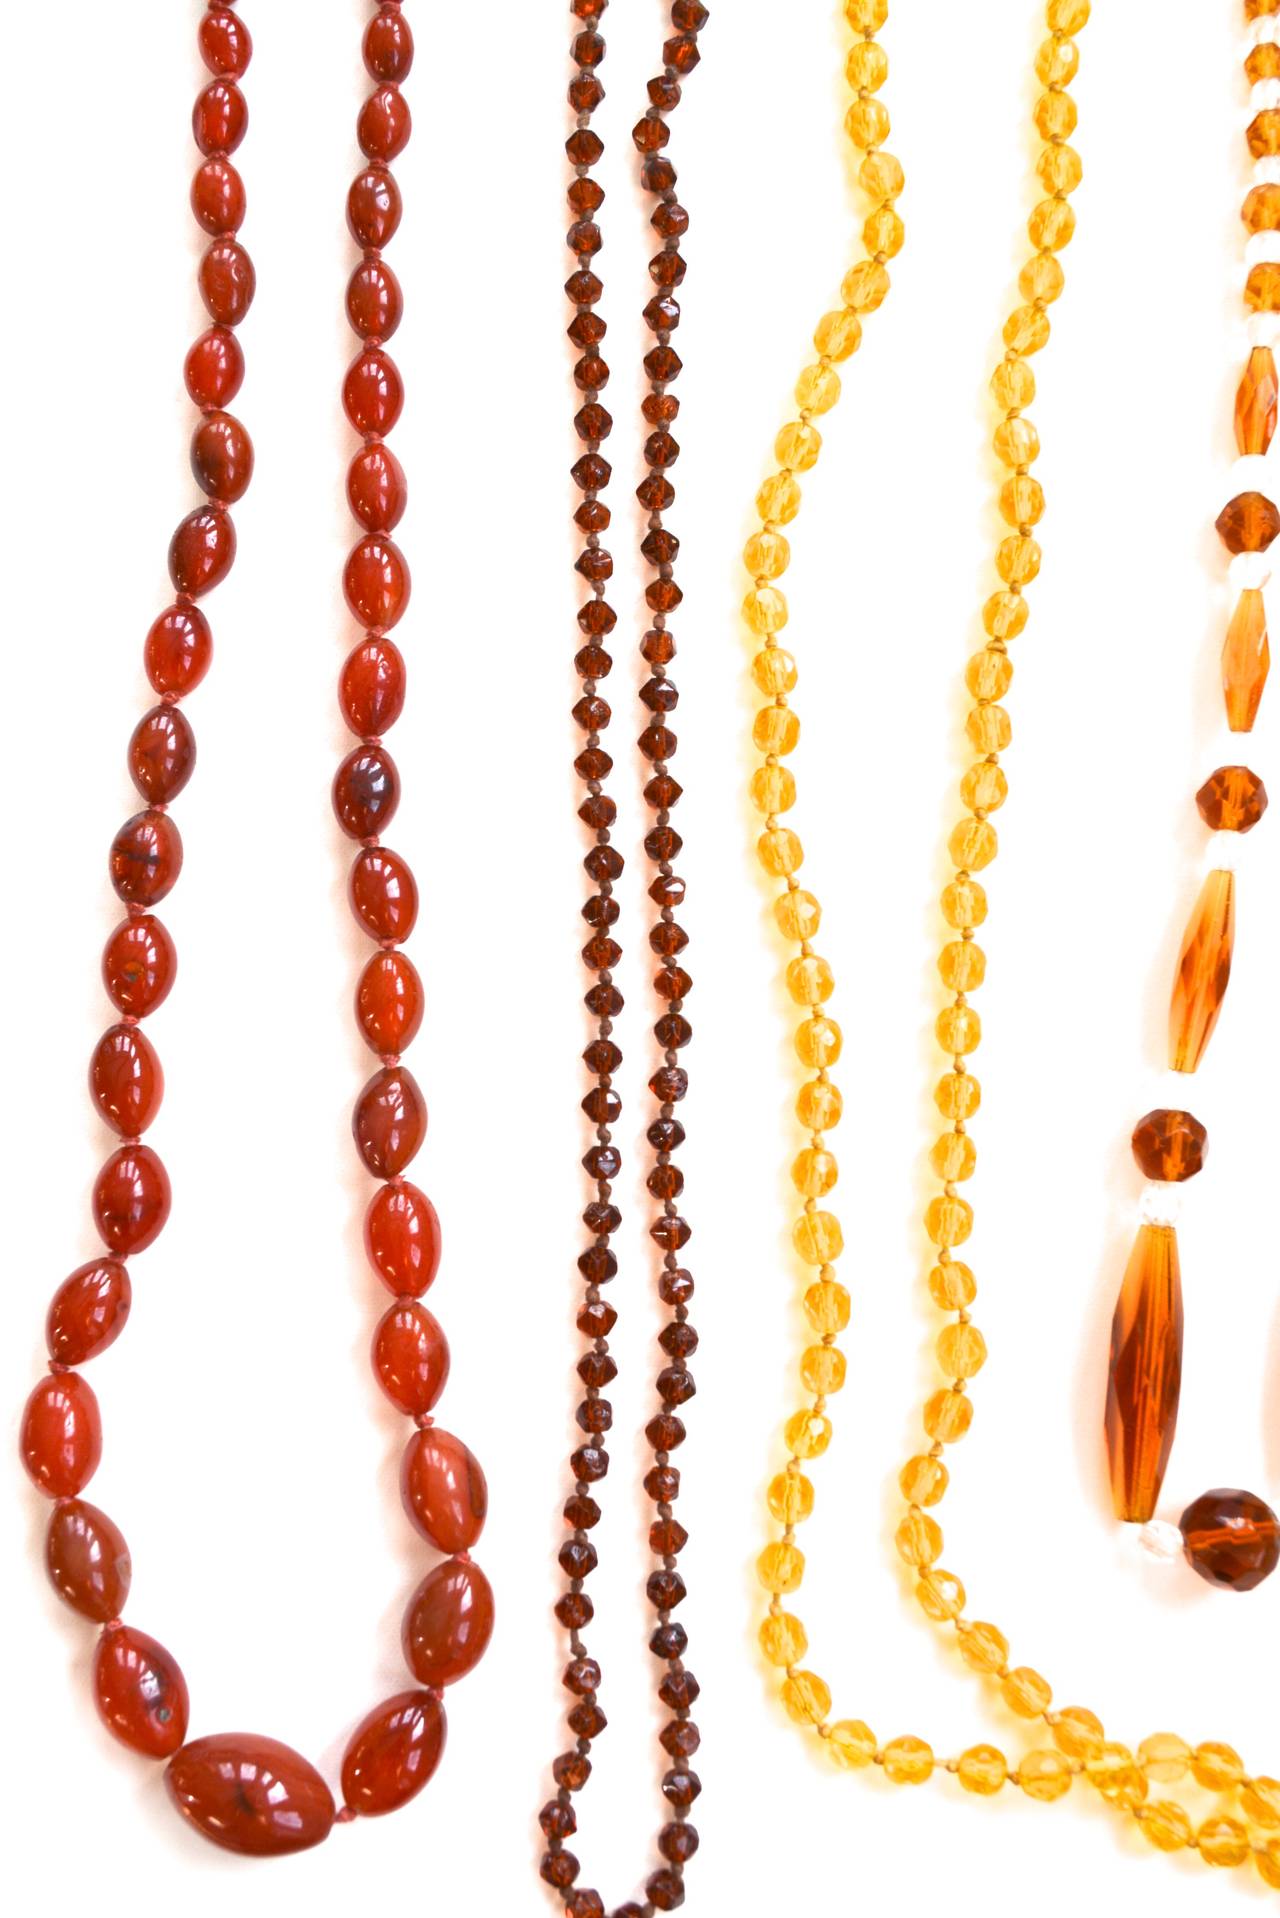 Women's 1920s Beaded Carnelian and Glass Necklace Collection